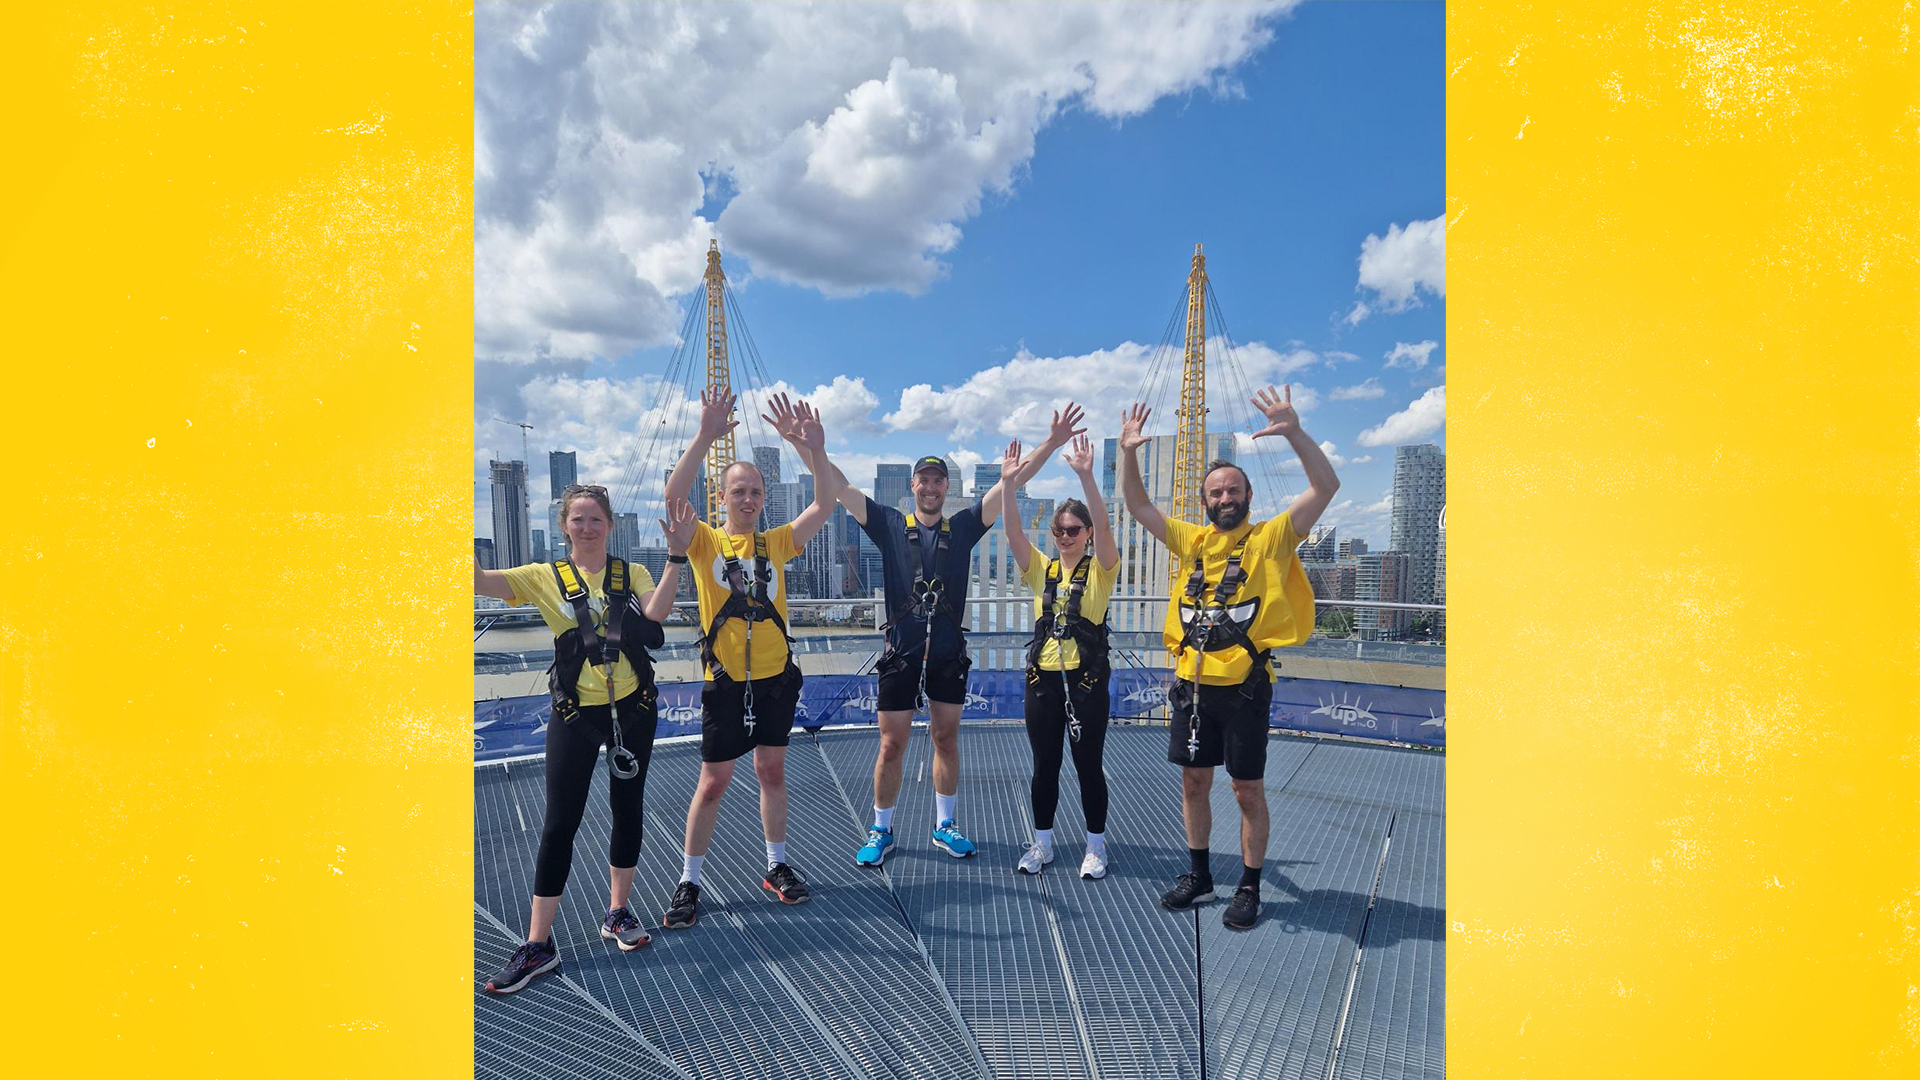 Five YoungMinds staff members at the top of The O2 wearing yellow t-shirts. Their hands are all raised in the air.